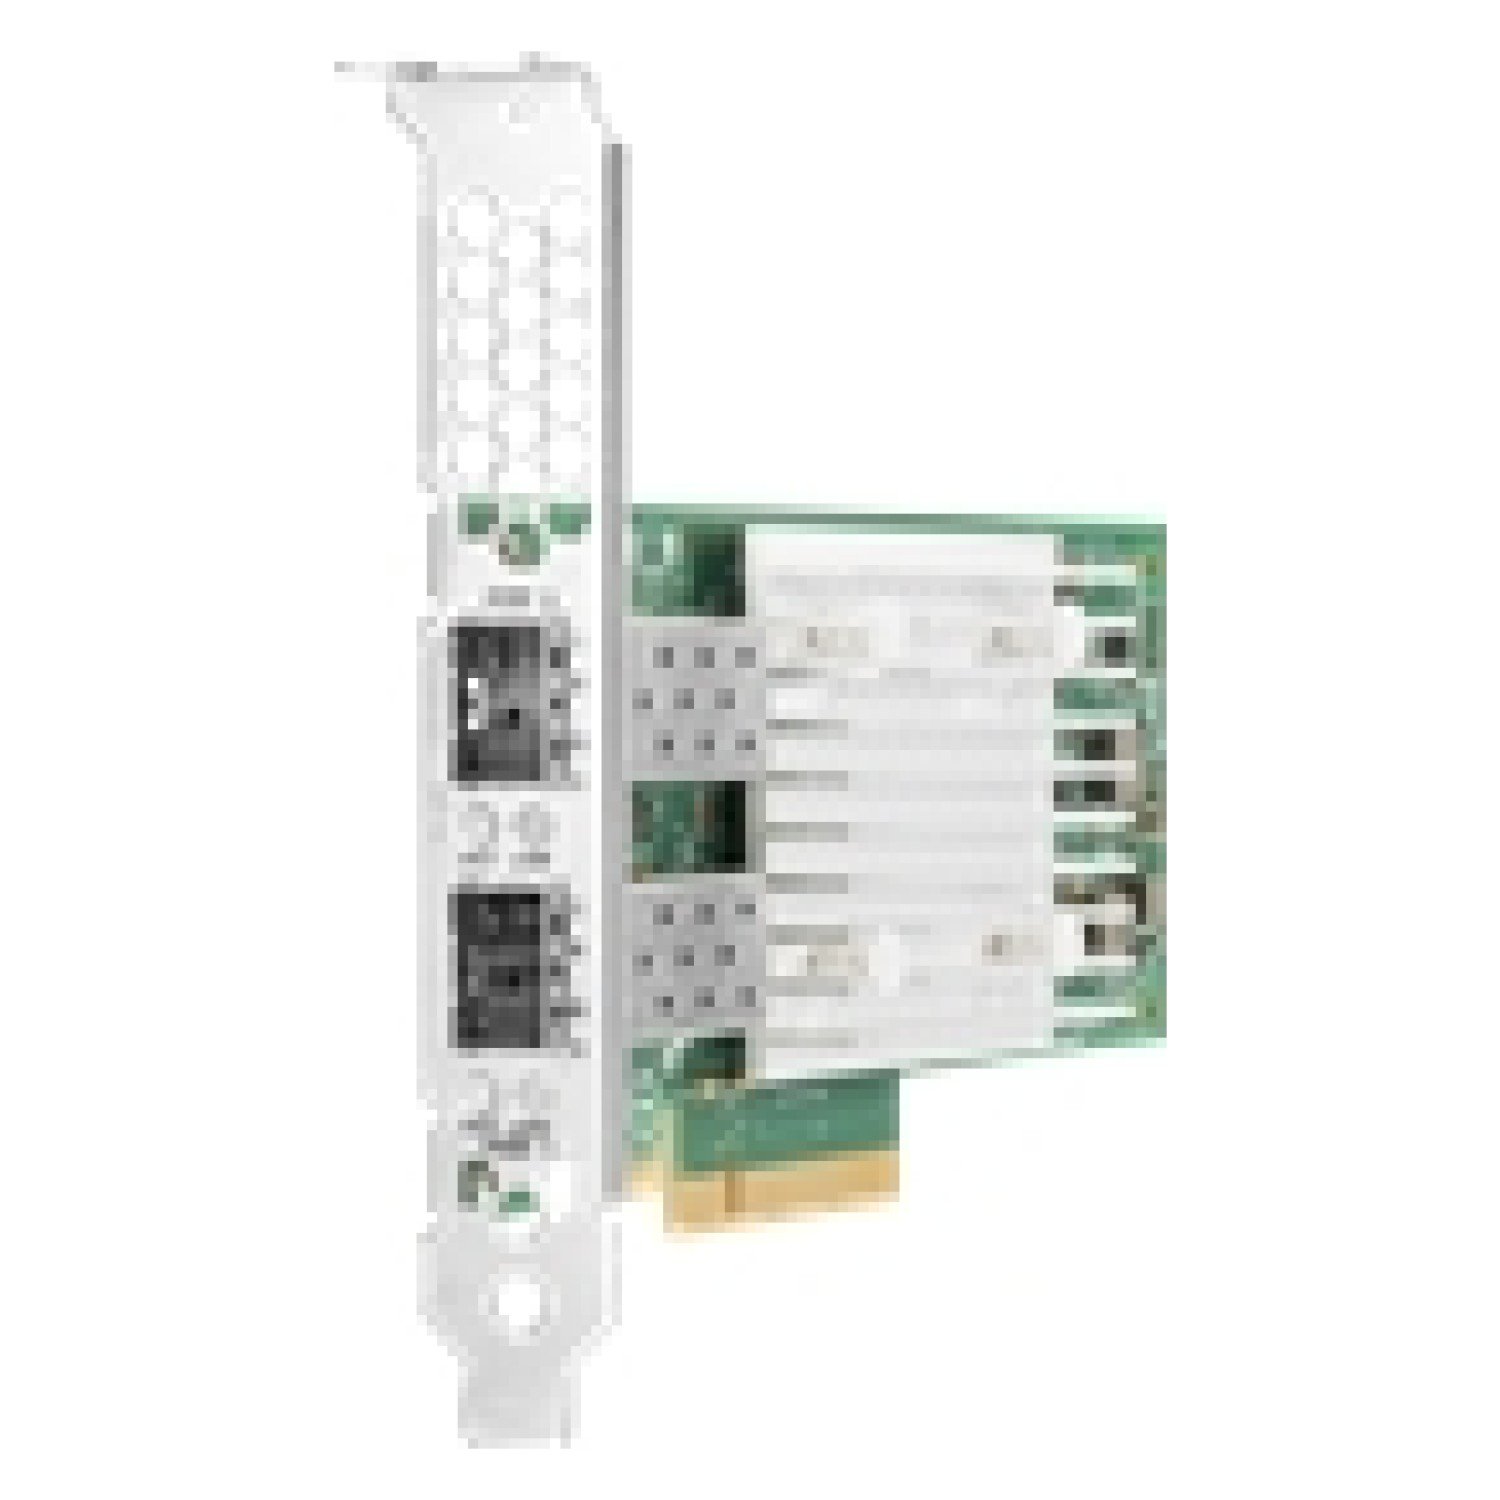 HPE Adapter 10GbE 2p SFP+ BCM 57412